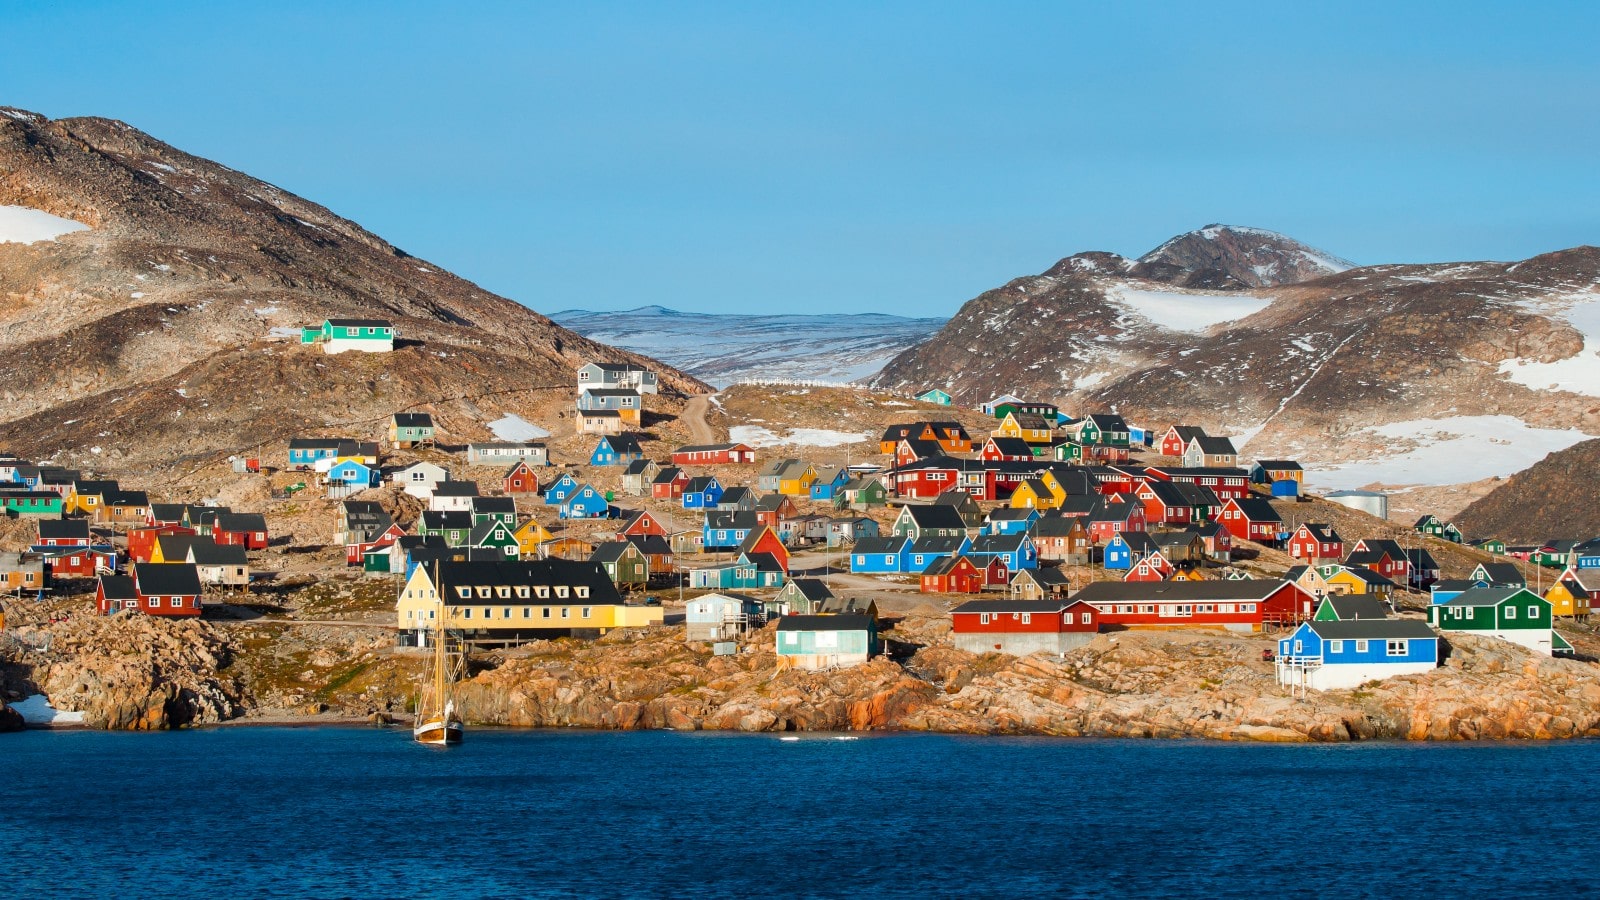 Ittoqqortoormiit, Greenland - - most remote places on earth